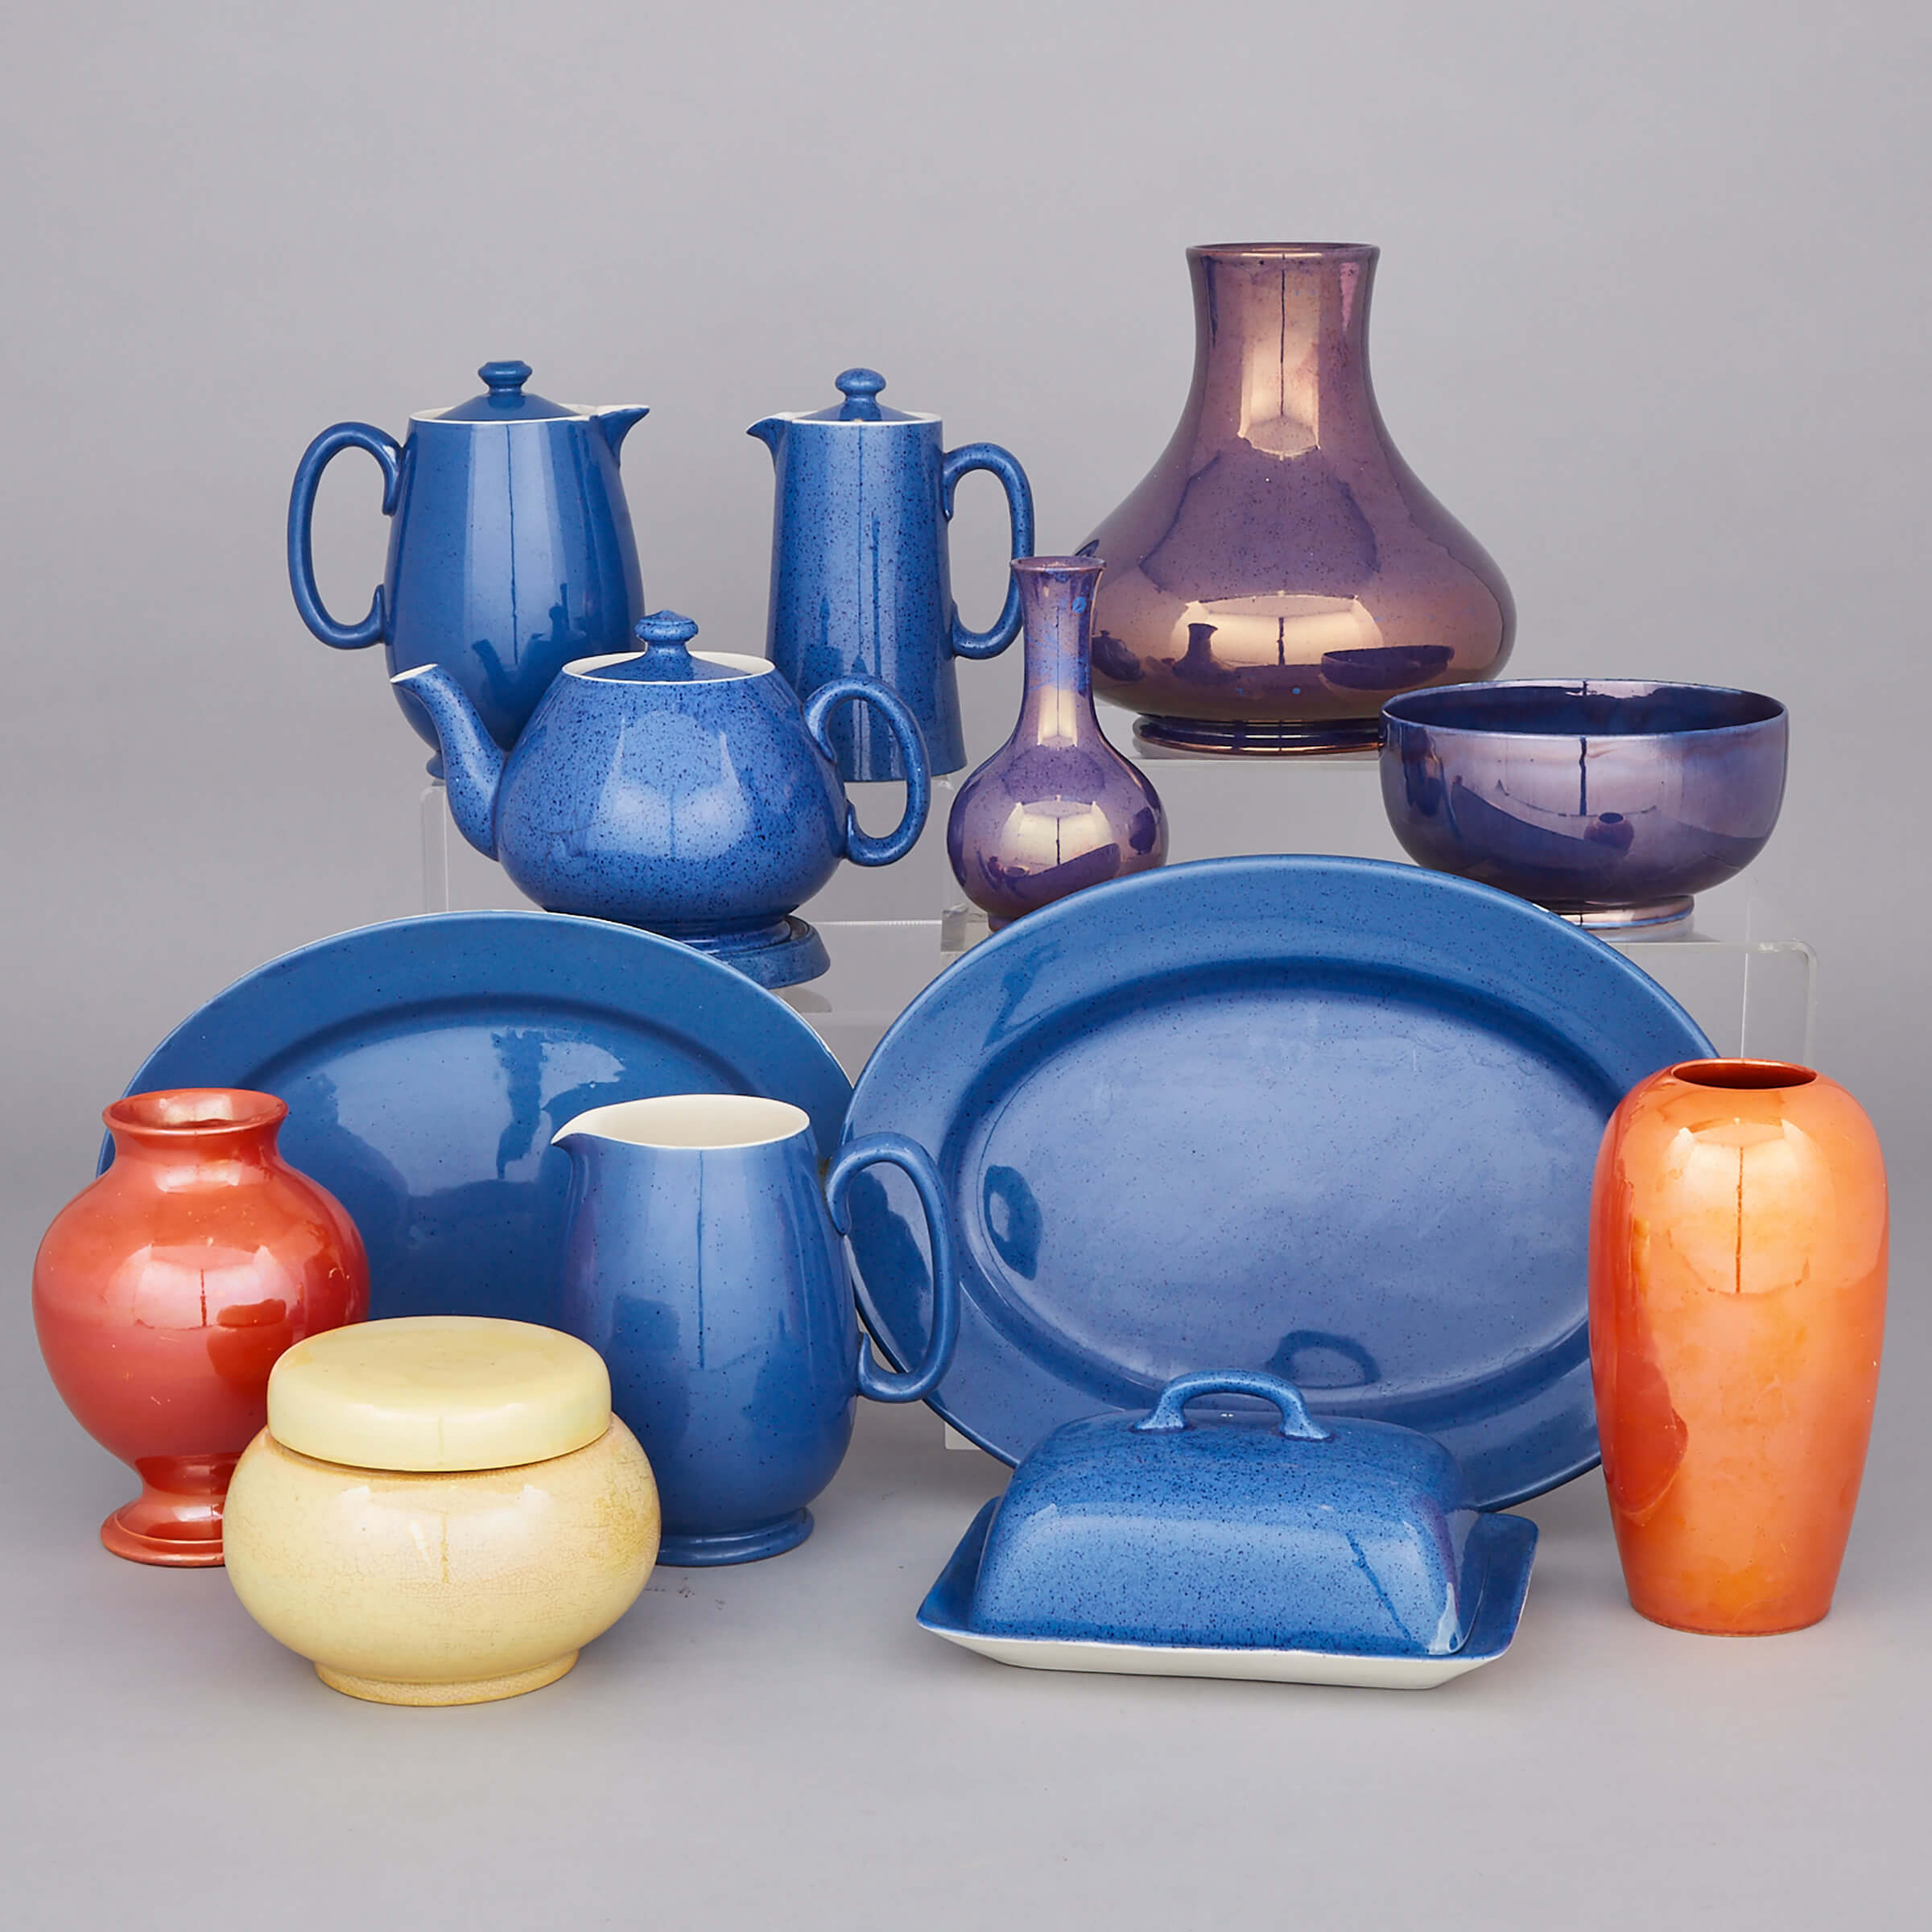 Group of Seven Moorcroft Powder Blue Articles, Four Lustre Vases, a Bowl and Covered Jar, c.1914-35